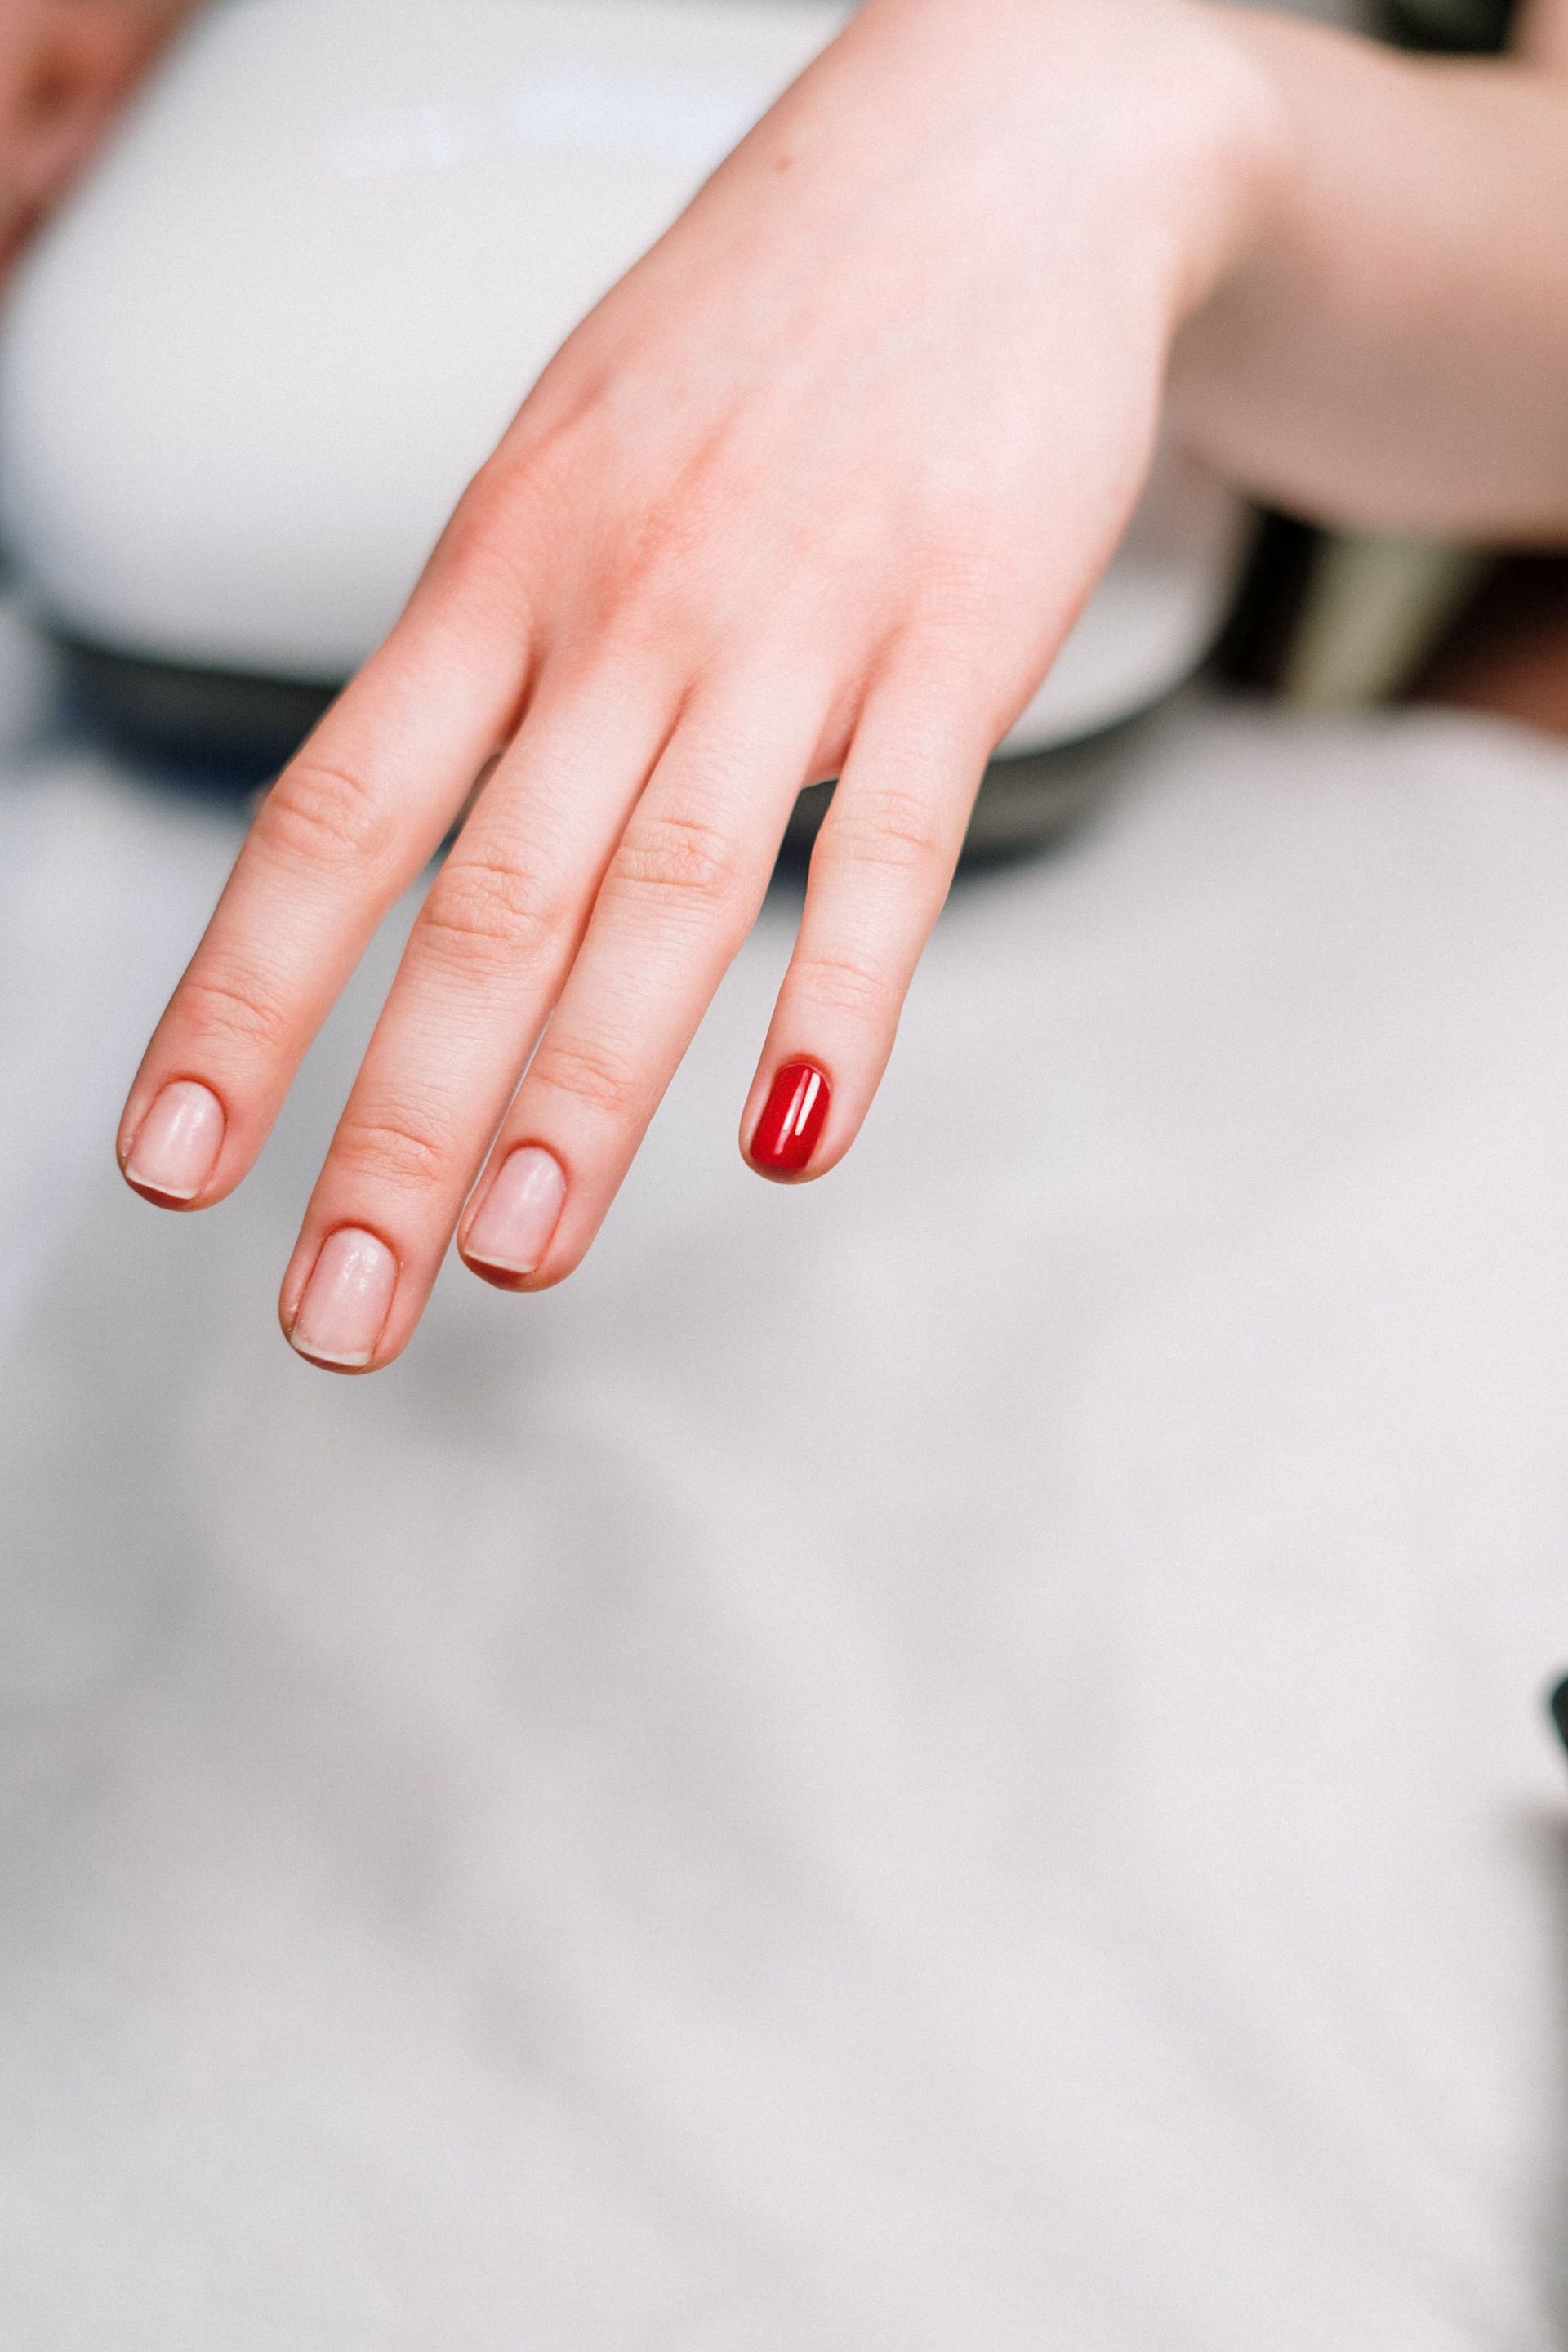 The importance of magnesium for nails (Image via Pexels)